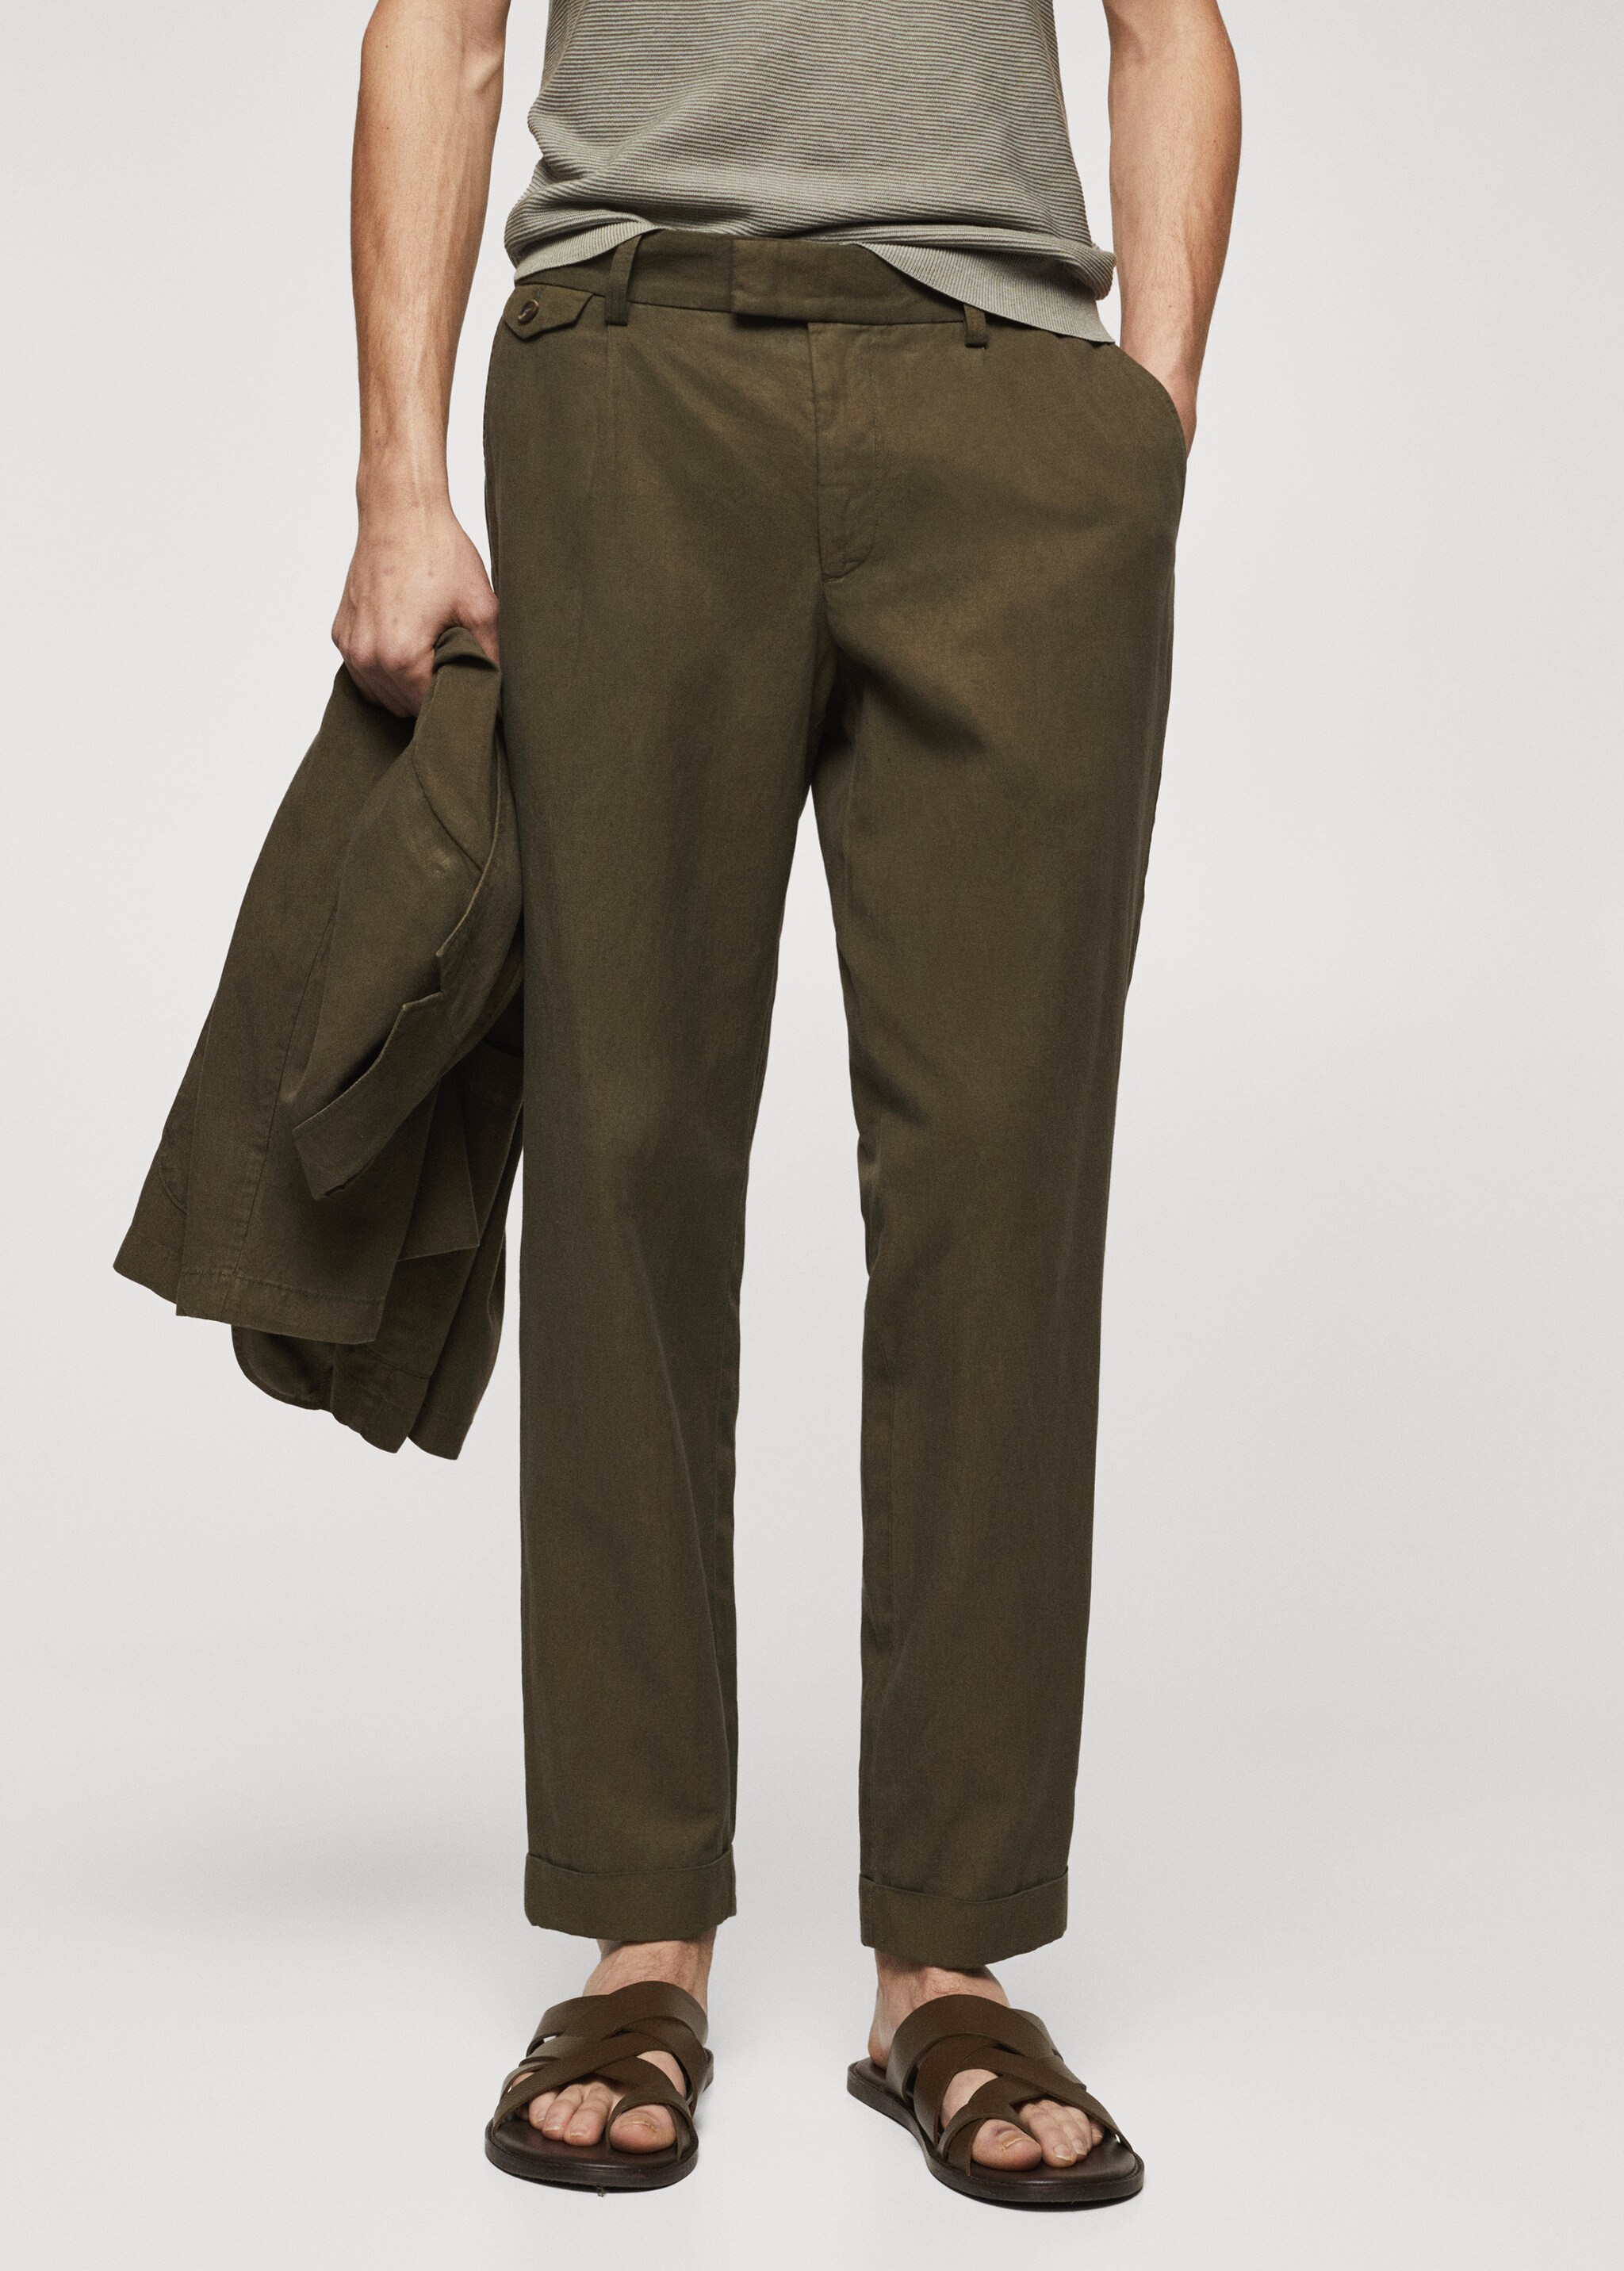 Pantalons tapered fit pinces - Pla mig